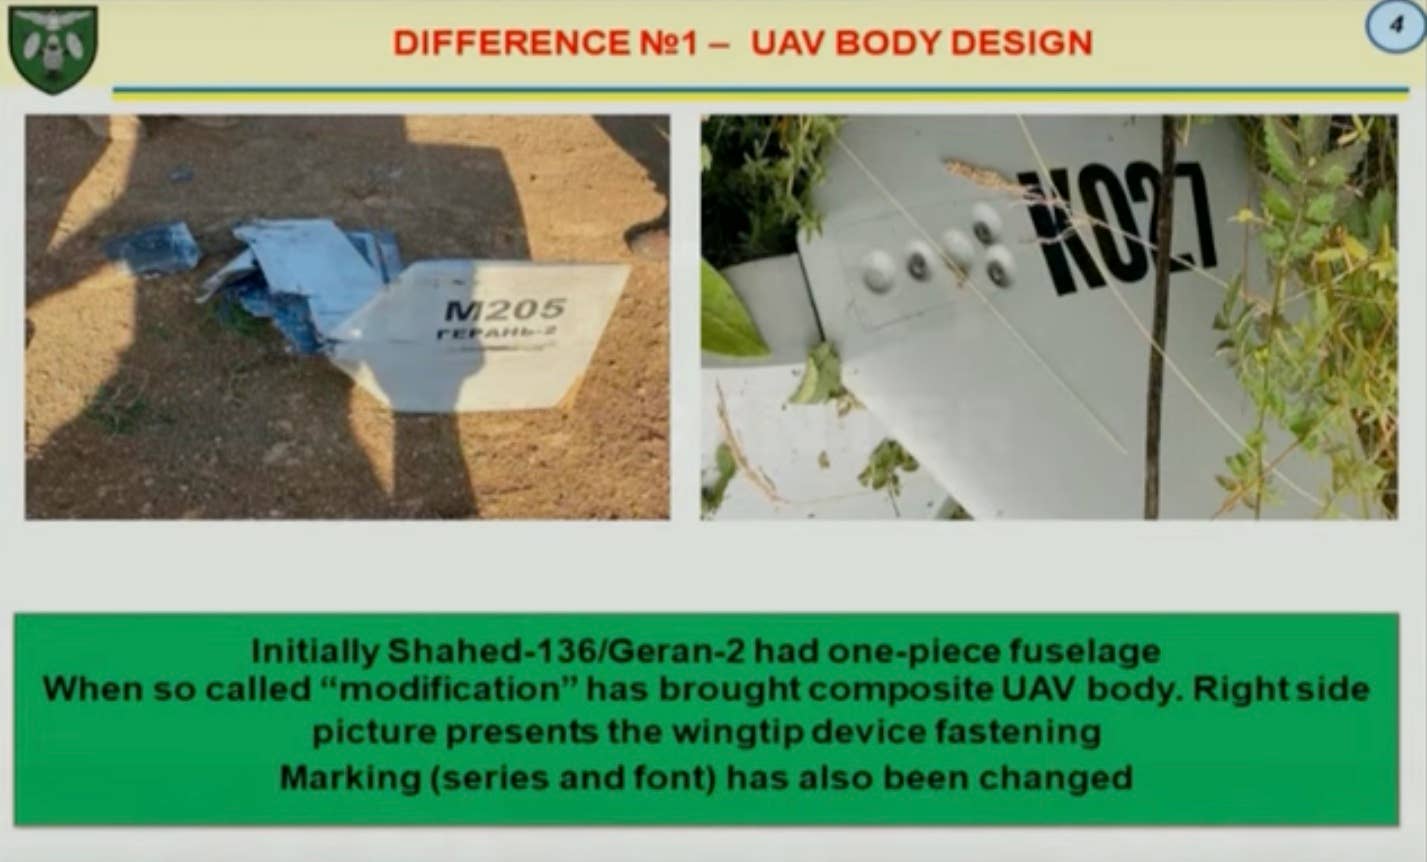 The new Shahed-136 drones have a composite body instead of a modular, one-piece fuselage, Ukraine says. (Ukrainian Military Media Center screencap)